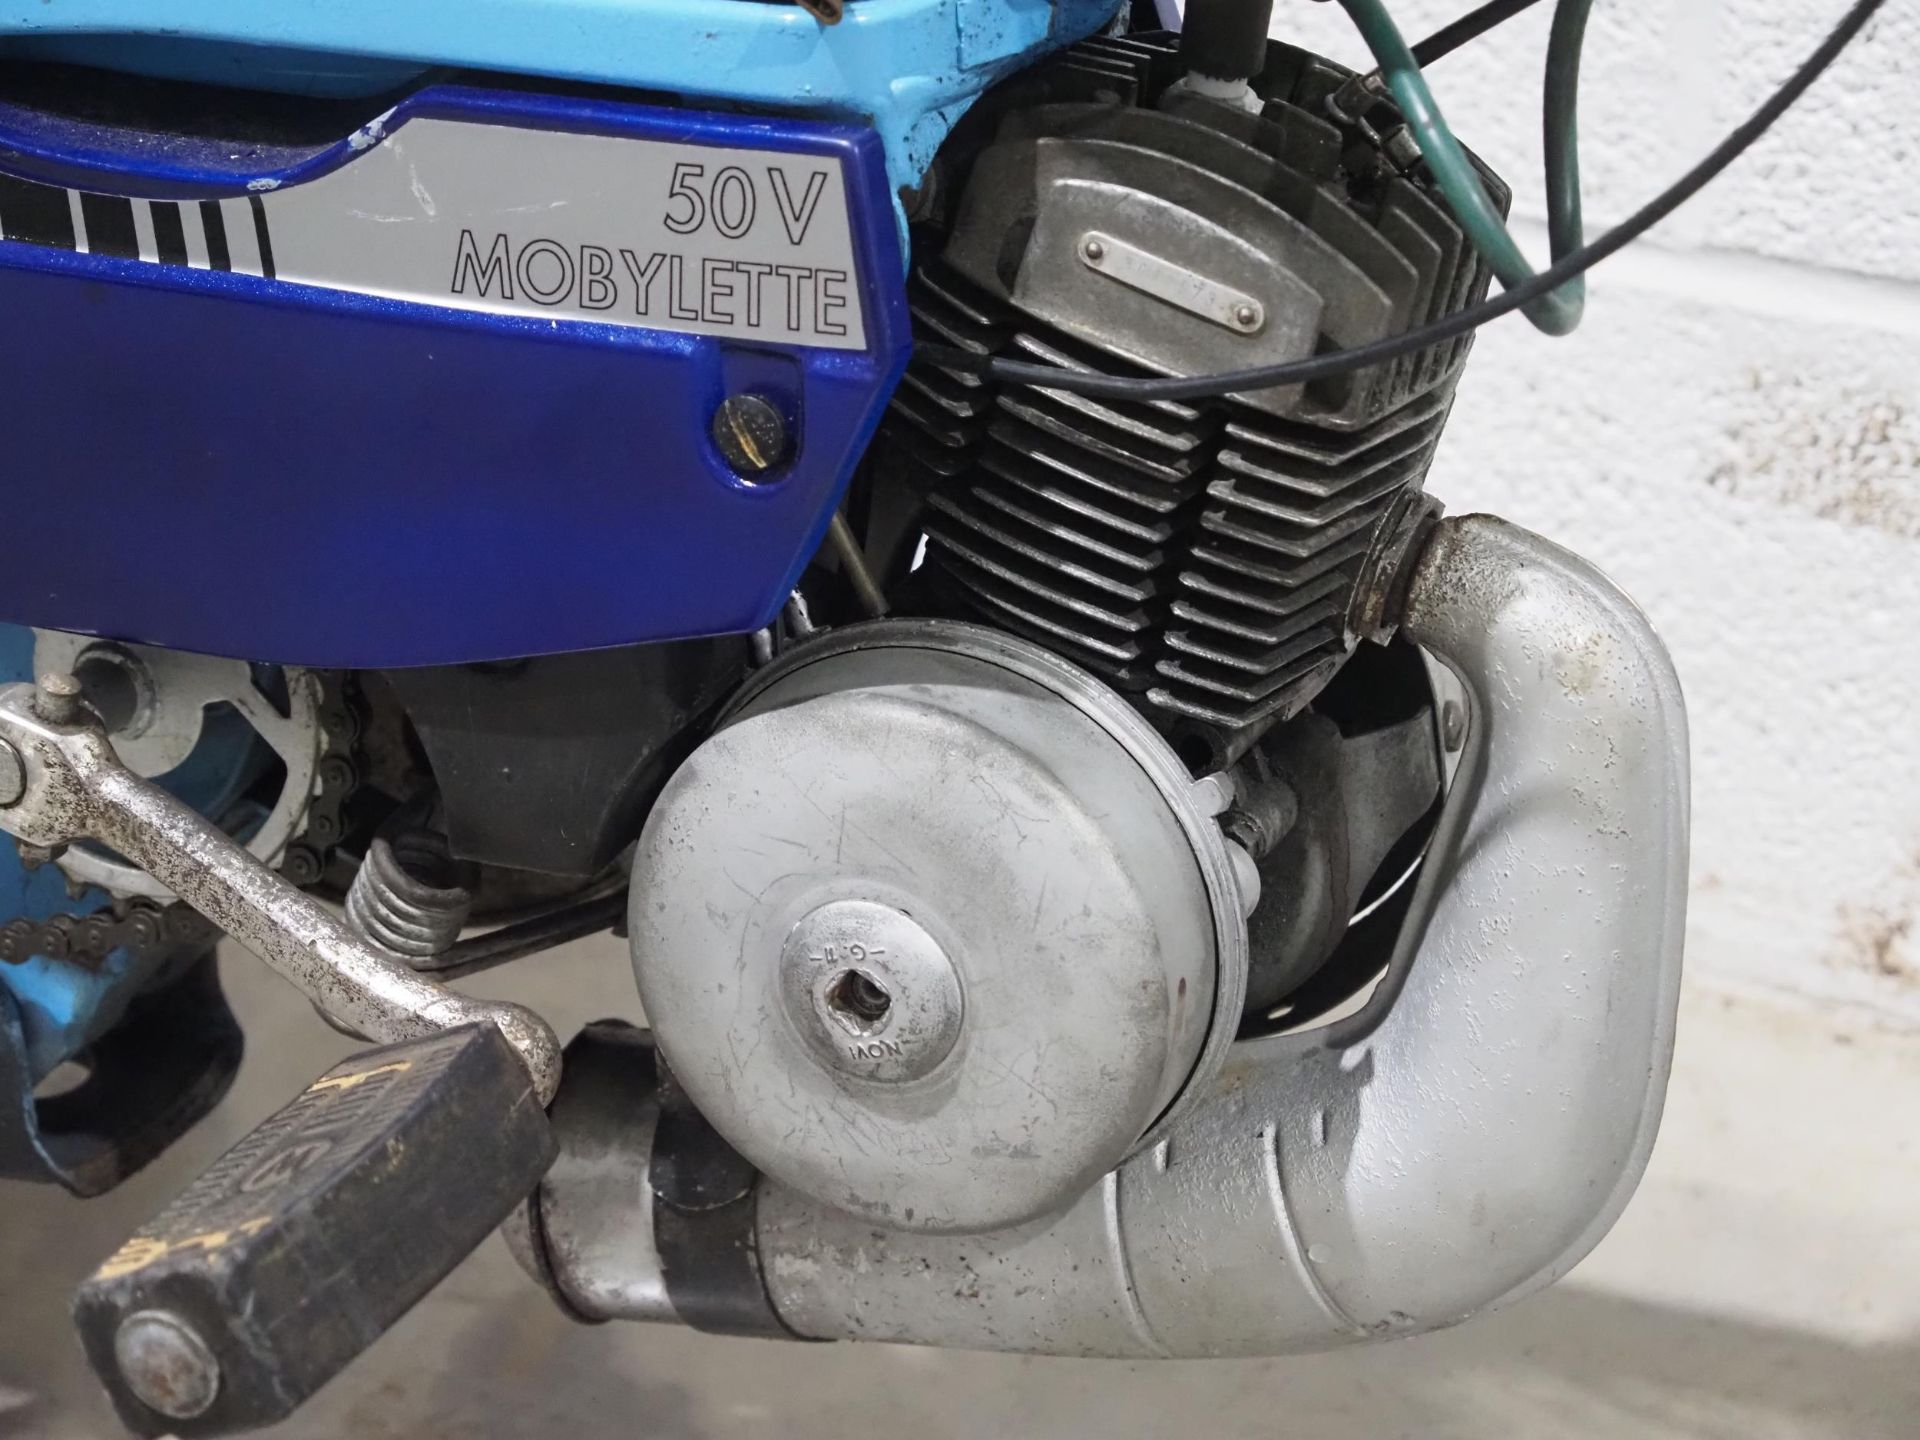 Motobecane 50V Mobylette moped. 1977. 49cc. Was running when stored some time ago and so will need - Image 4 of 6